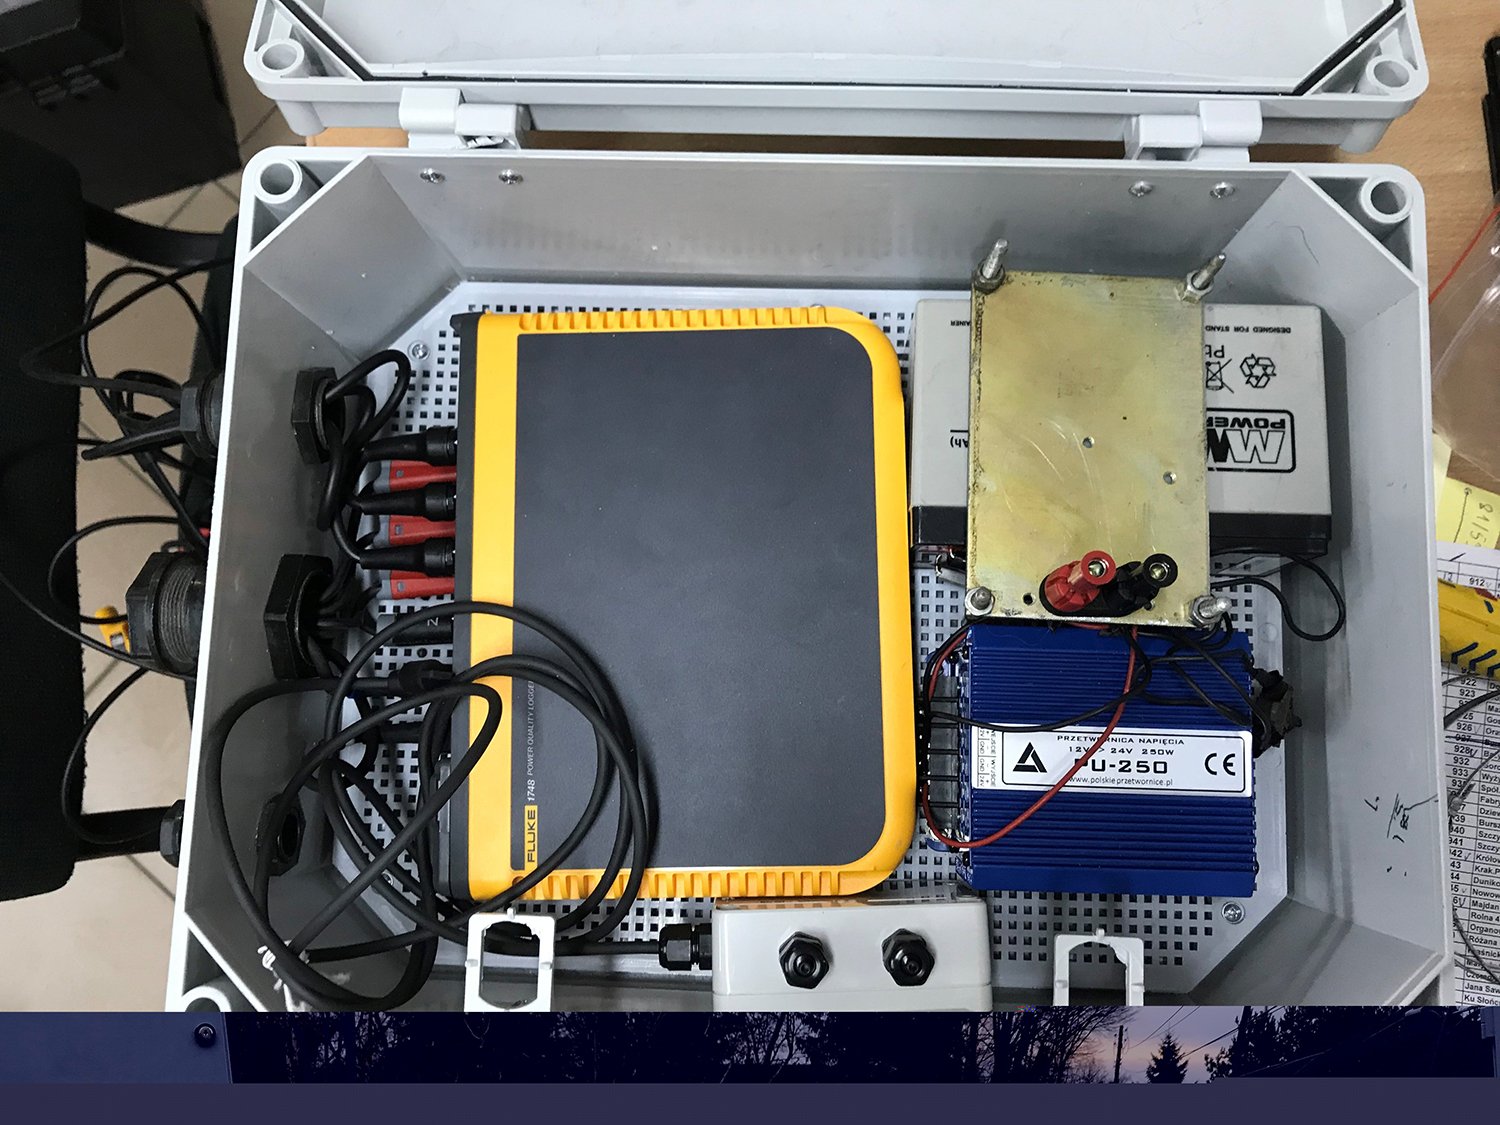 The (IP65) Fluke 1748 analyzer and other components were housed in a small prefabricated IP65 enclosure.